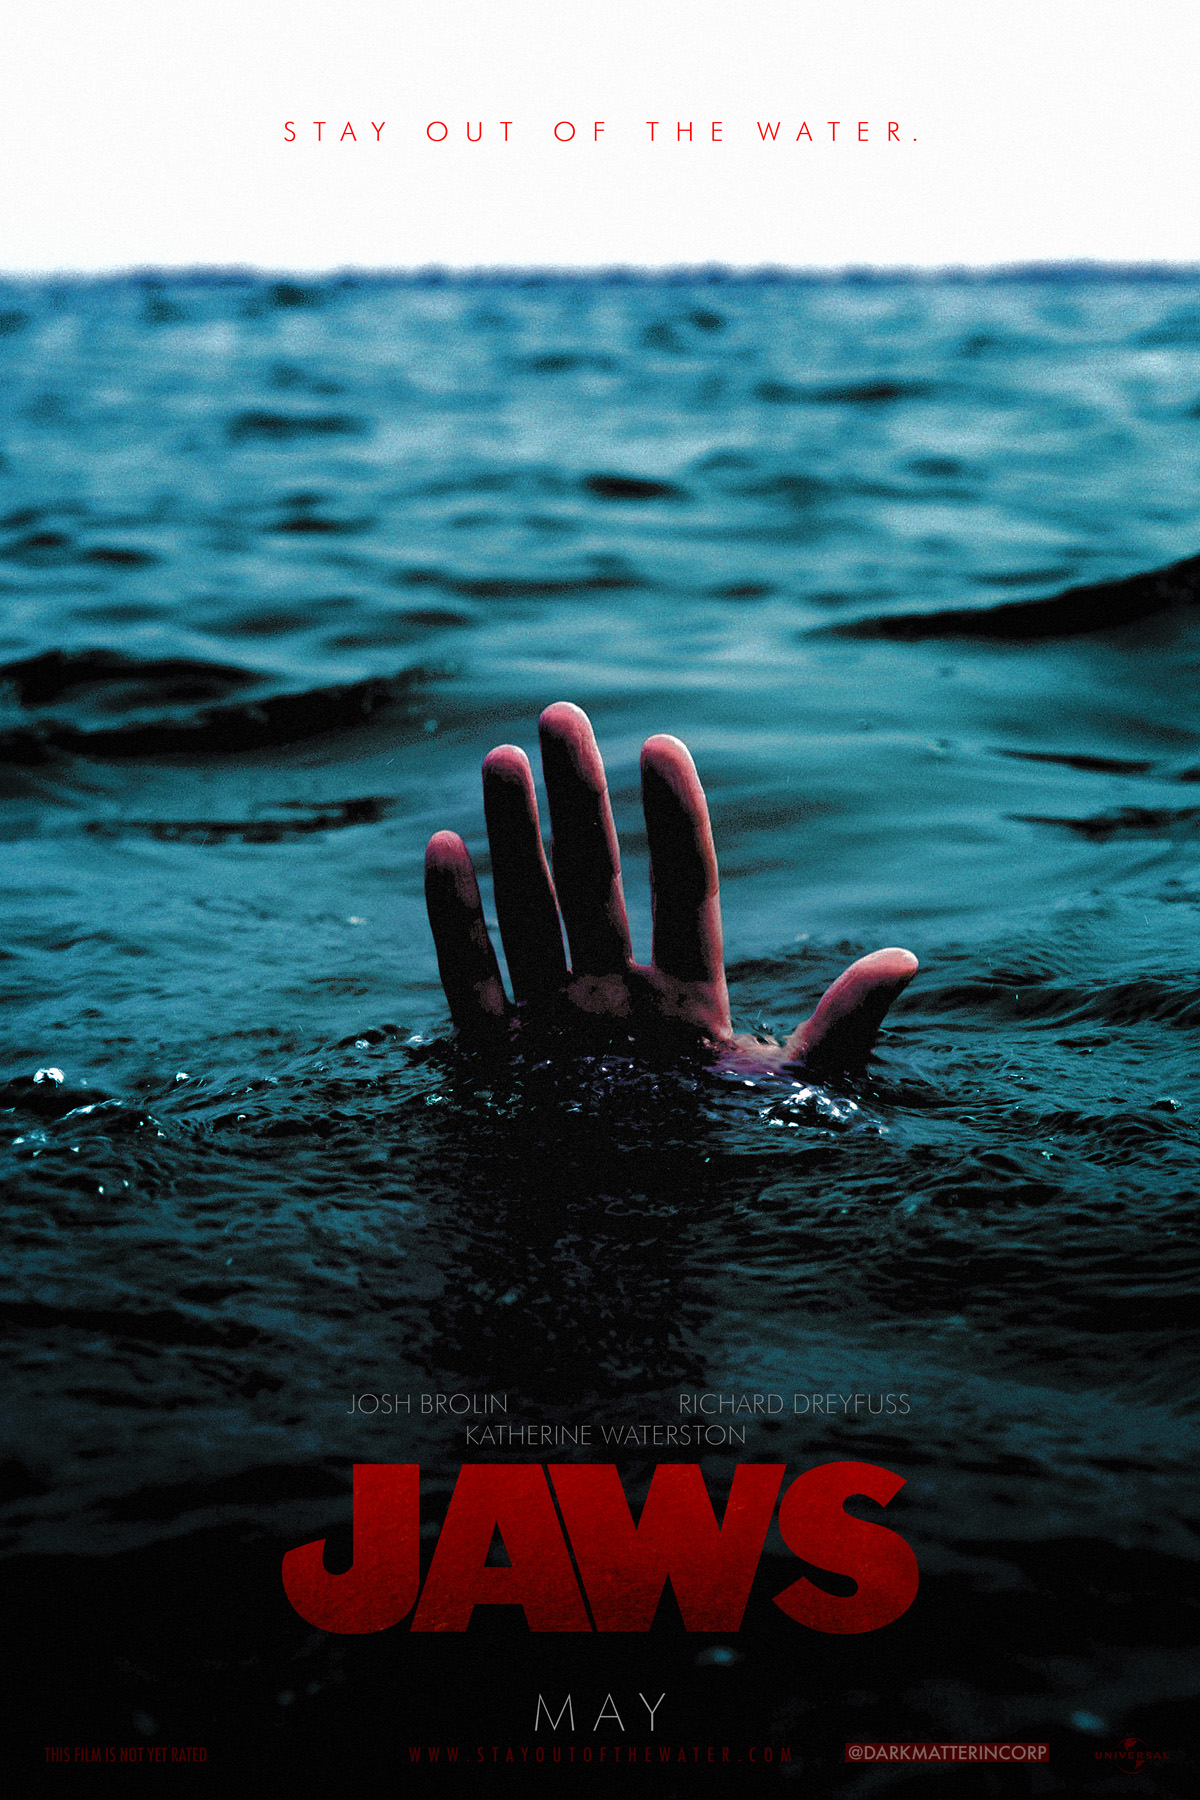 Jaws (fake poster) by Ian Fried